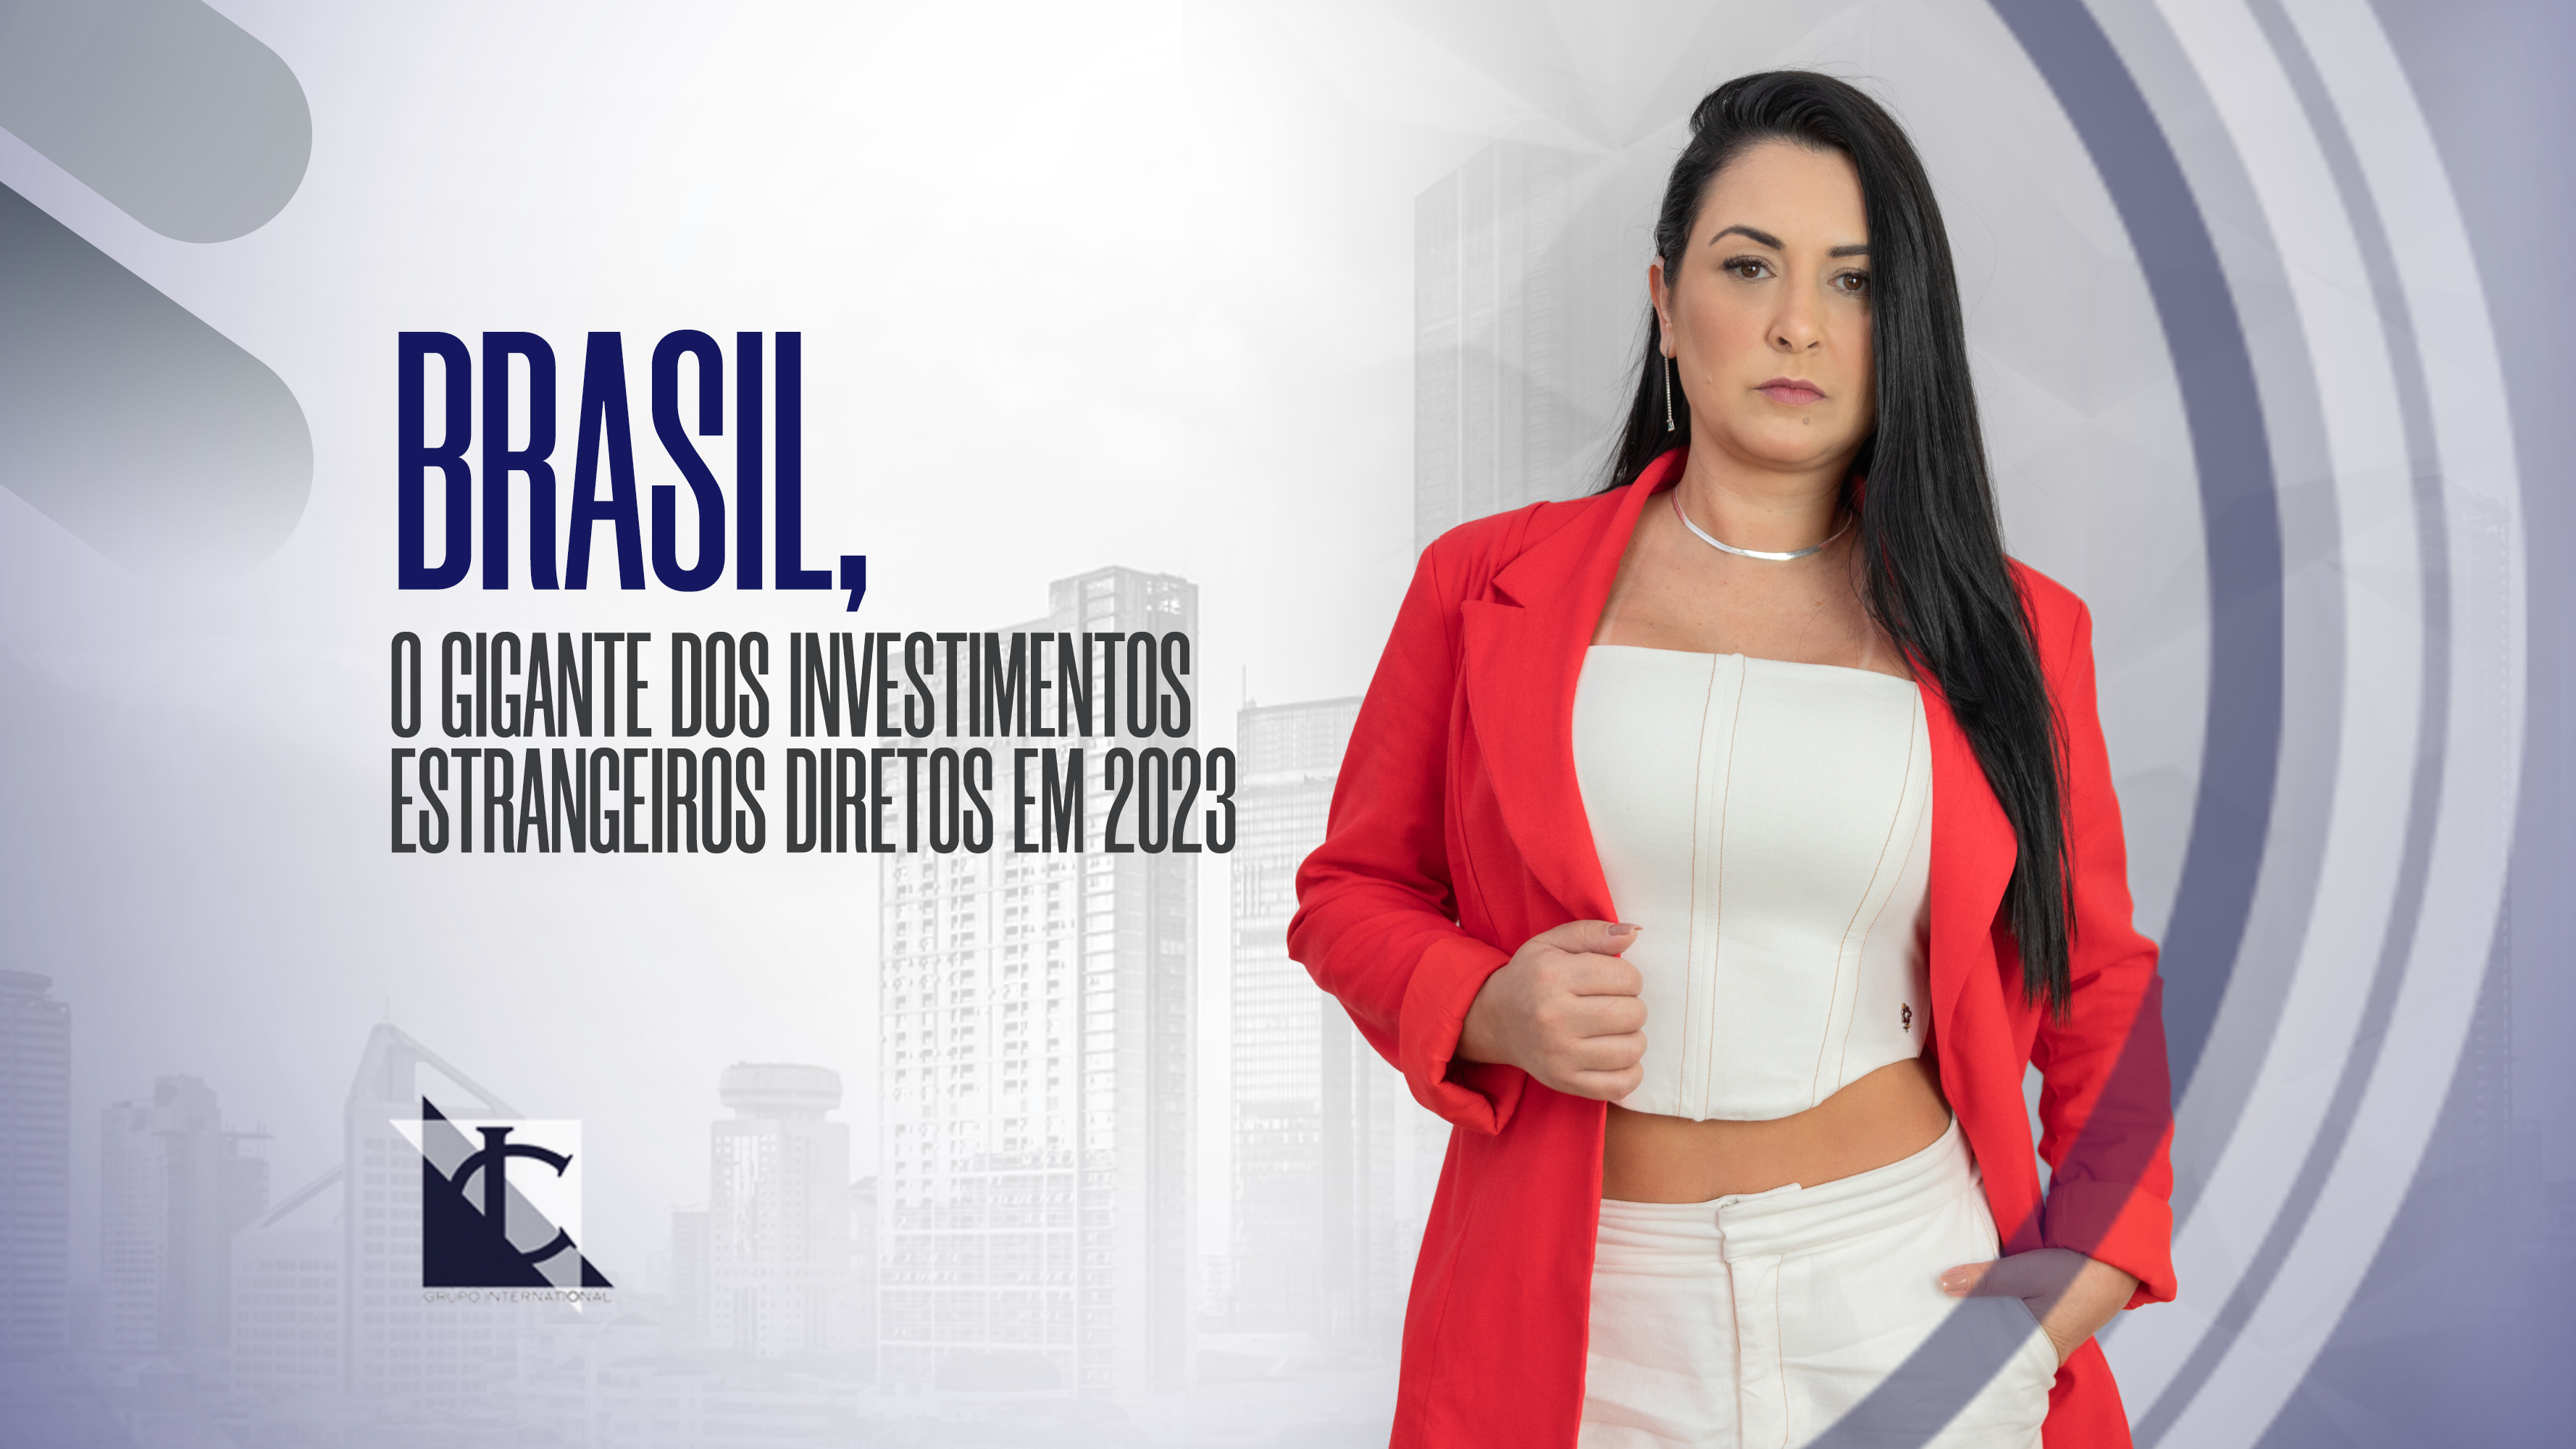 Read more about BRAZIL, THE GIANT FOR FOREIGN DIRECT INVESTMENT IN 2023